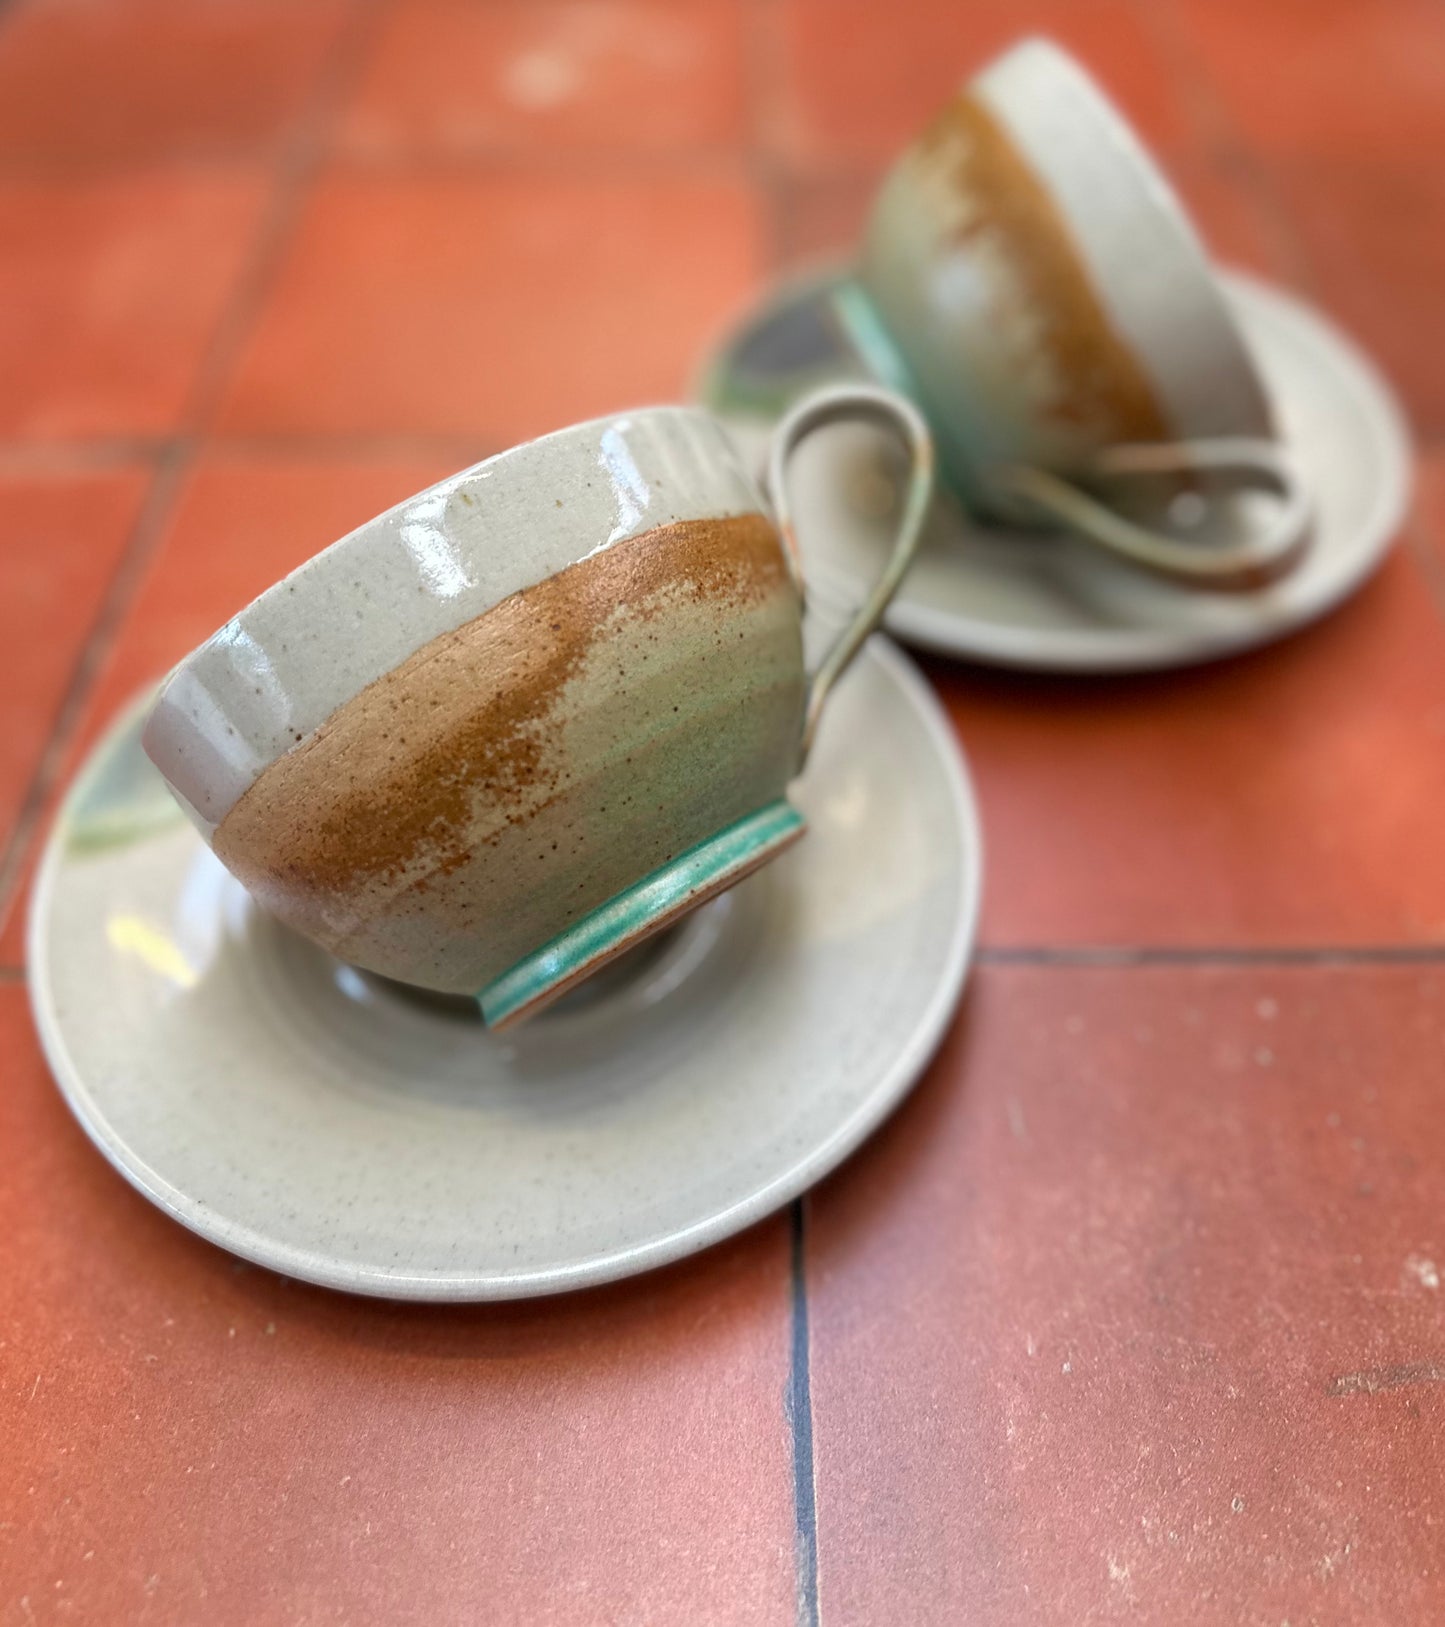 Cup & Saucer (Signature Collection)